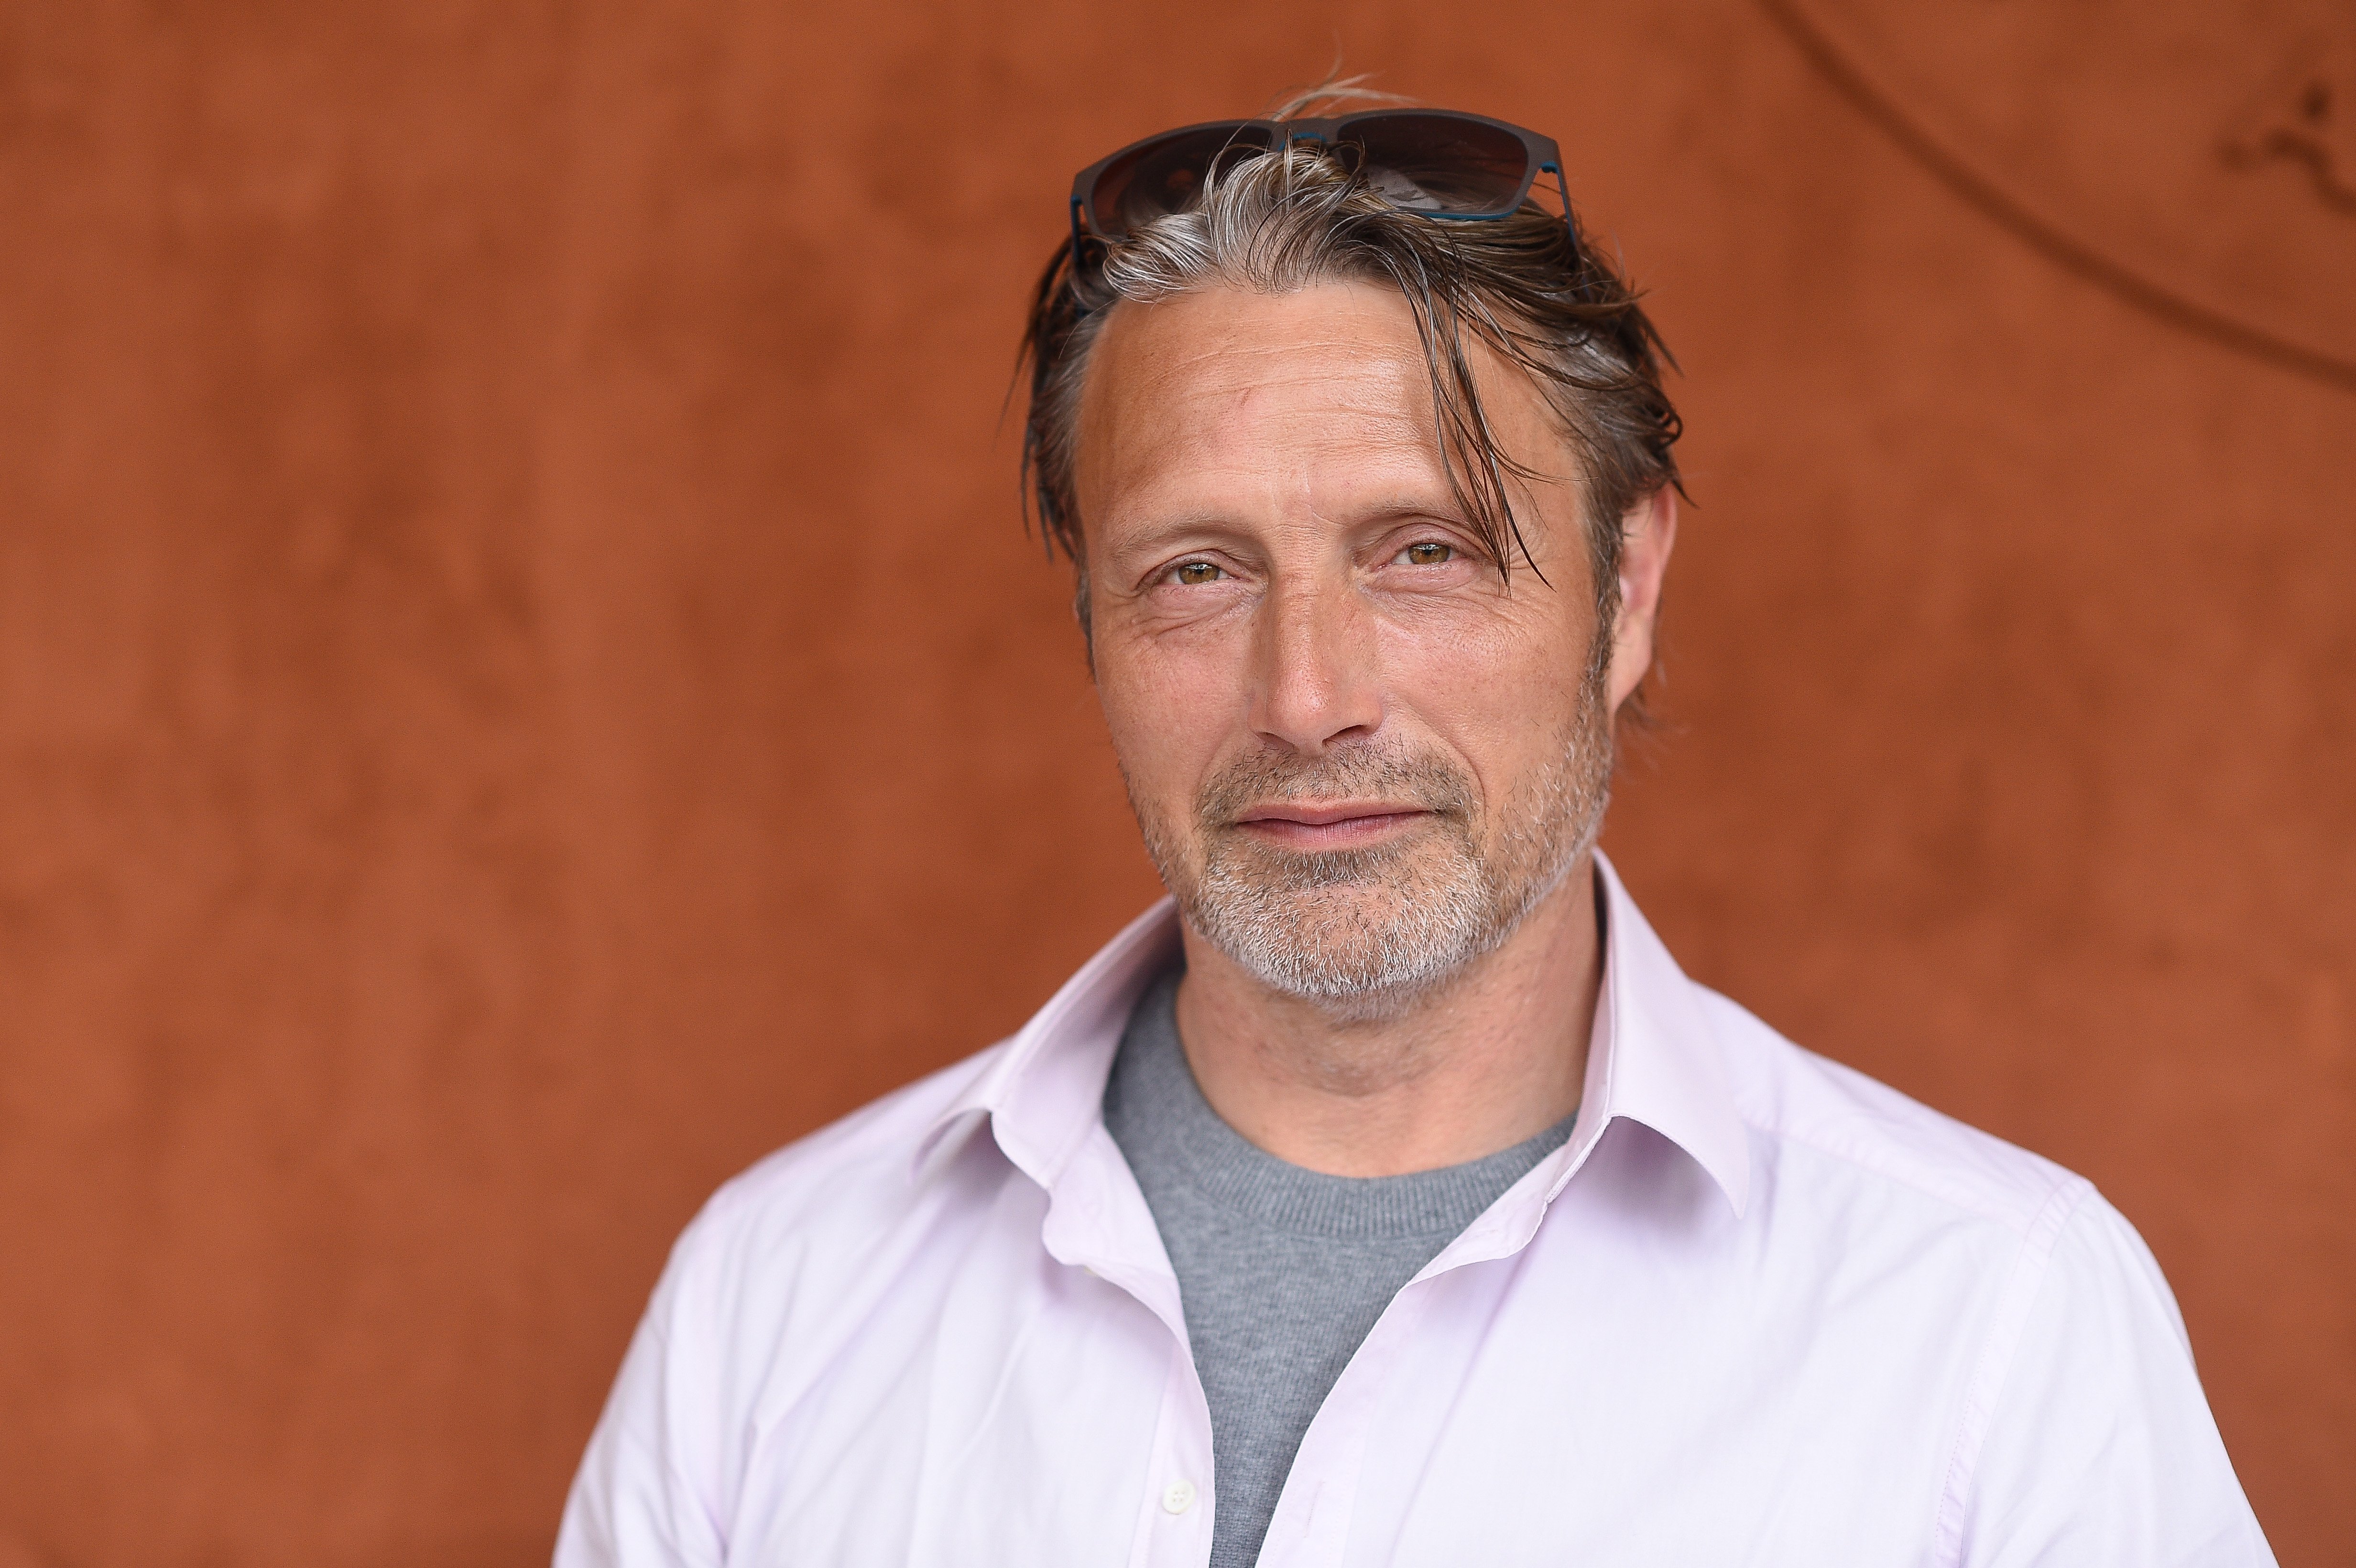  Mads Mikkelsen attends the 2019 French Tennis Open on June 9, 2019 in Paris, France. | Source: Getty Images